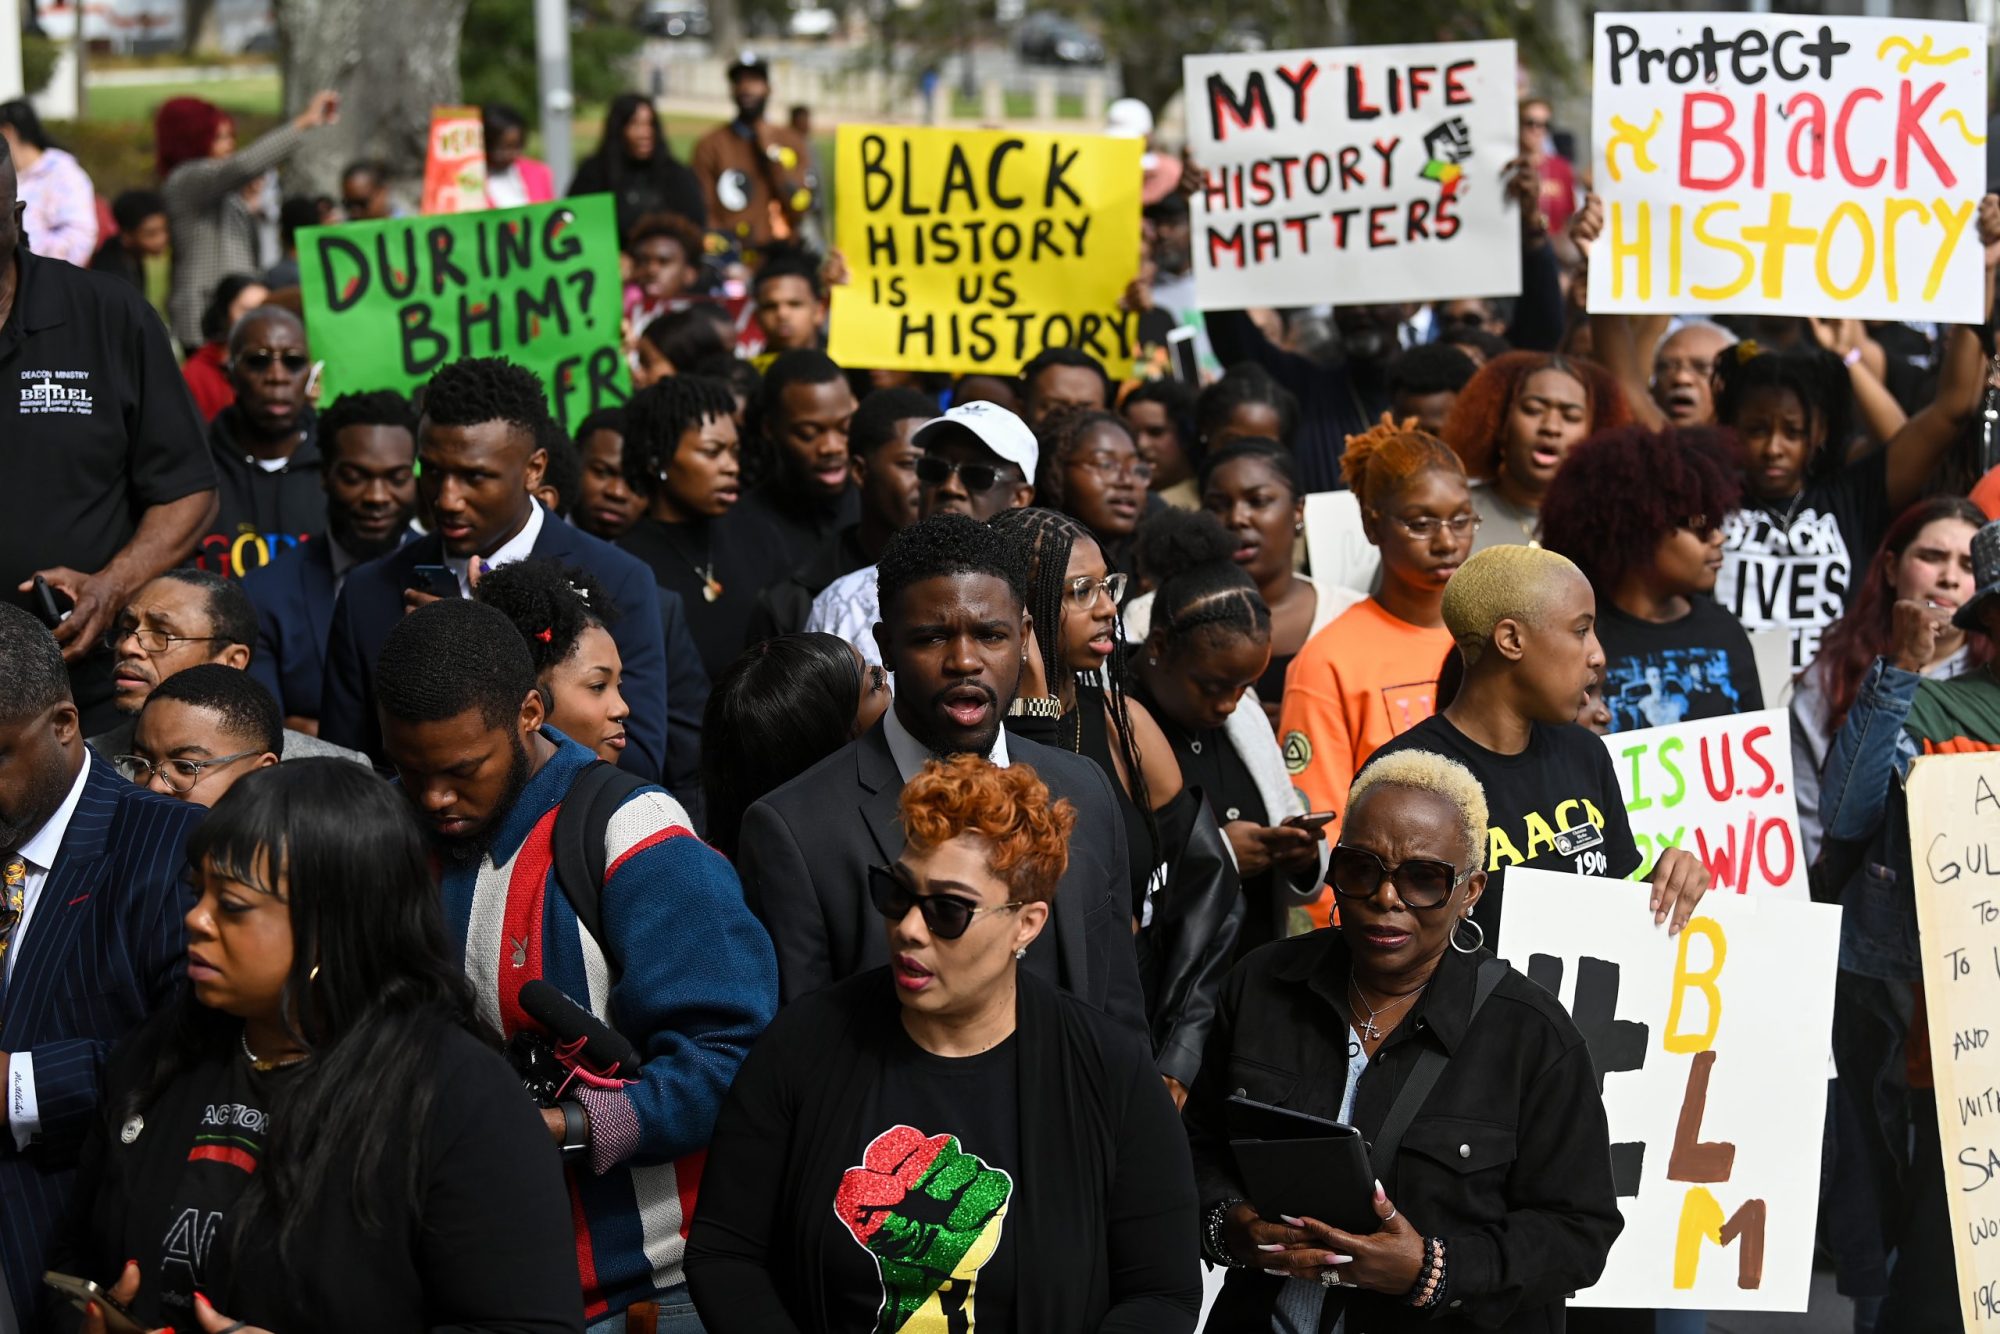 Demonstrators protest Florida Governor Ron DeSantis plan to eliminate Advanced Placement courses on African American studies in high schools as they stand outside the Florida State Capitol on February 15, 2023, in Tallahassee, Florida.